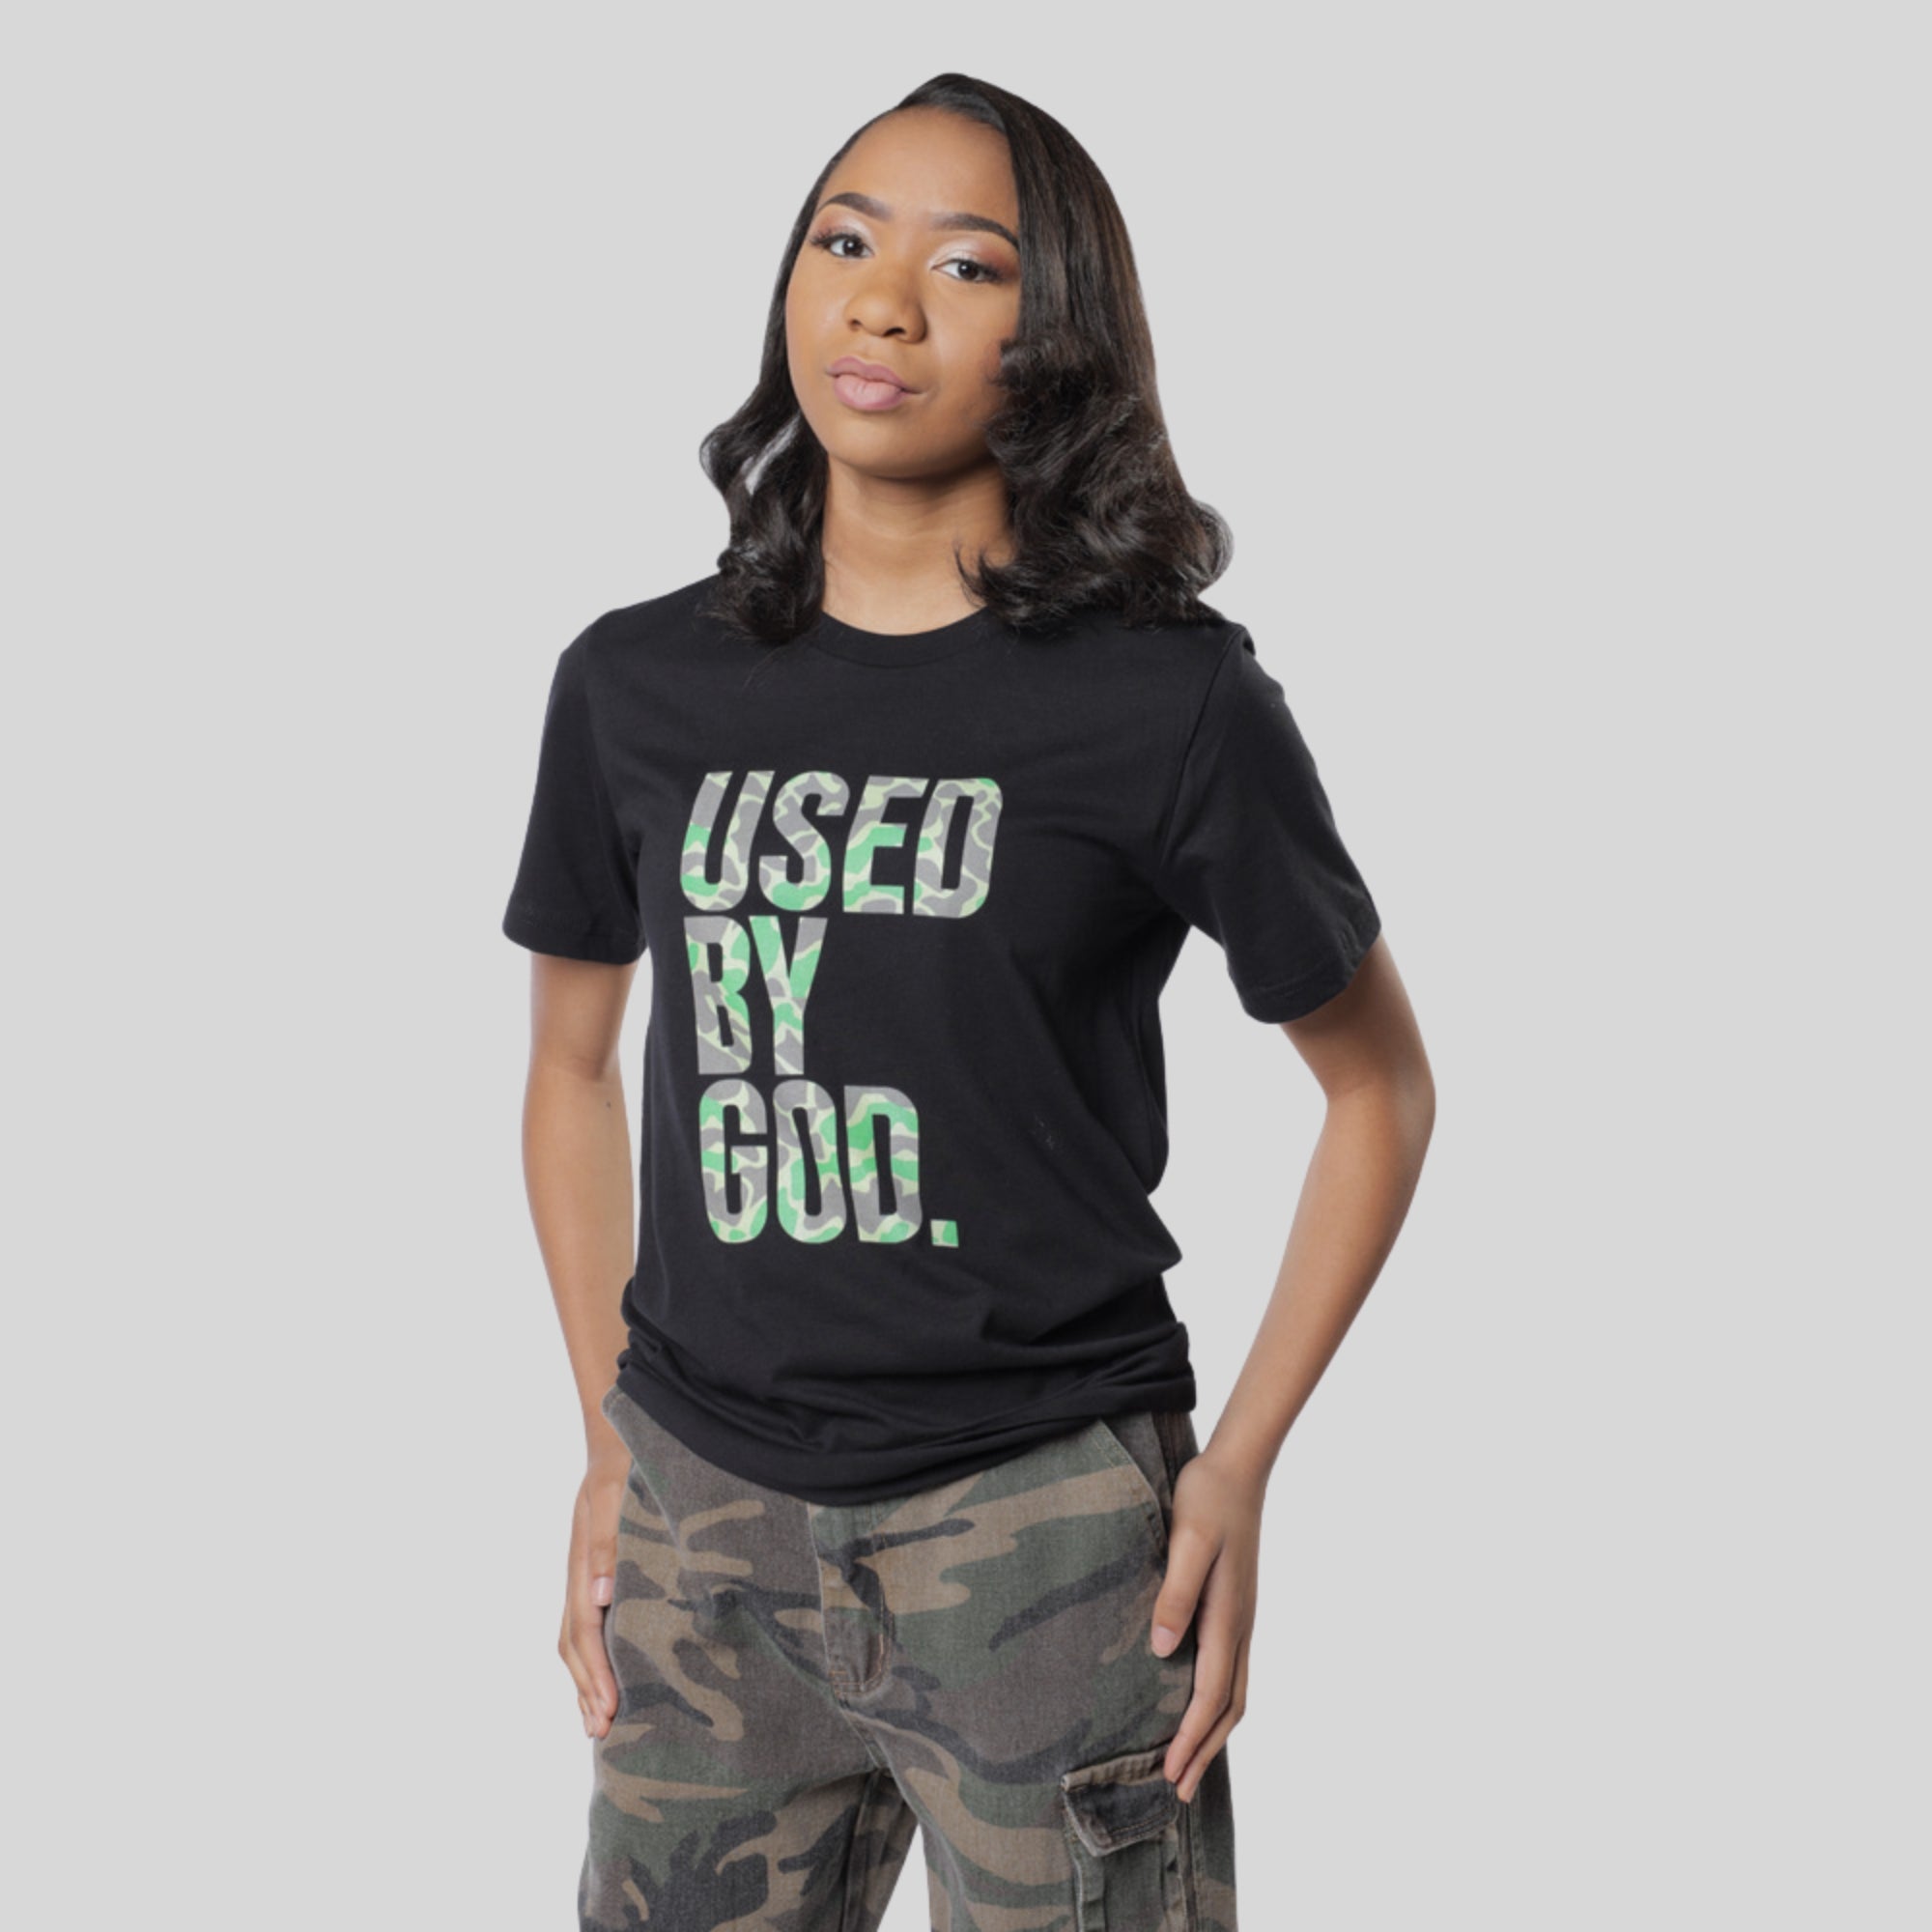 Used By God Camo Tee, Used By God, Used By God Clothing, Christian Apparel, Christian T-Shirts, Christian Shirts, christian t shirts for women, Men's Christian T-Shirt, Christian Clothing, God Shirts, christian clothing t shirts, Christian Sweatshirts, womens christian t shirts, t-shirts about jesus, God Clothing, Jesus Hoodie, Jesus Clothes, God Is Dope, Art Of Homage, Red Letter Clothing, Elevated Faith, Beacon Threads, God The Father Apparel